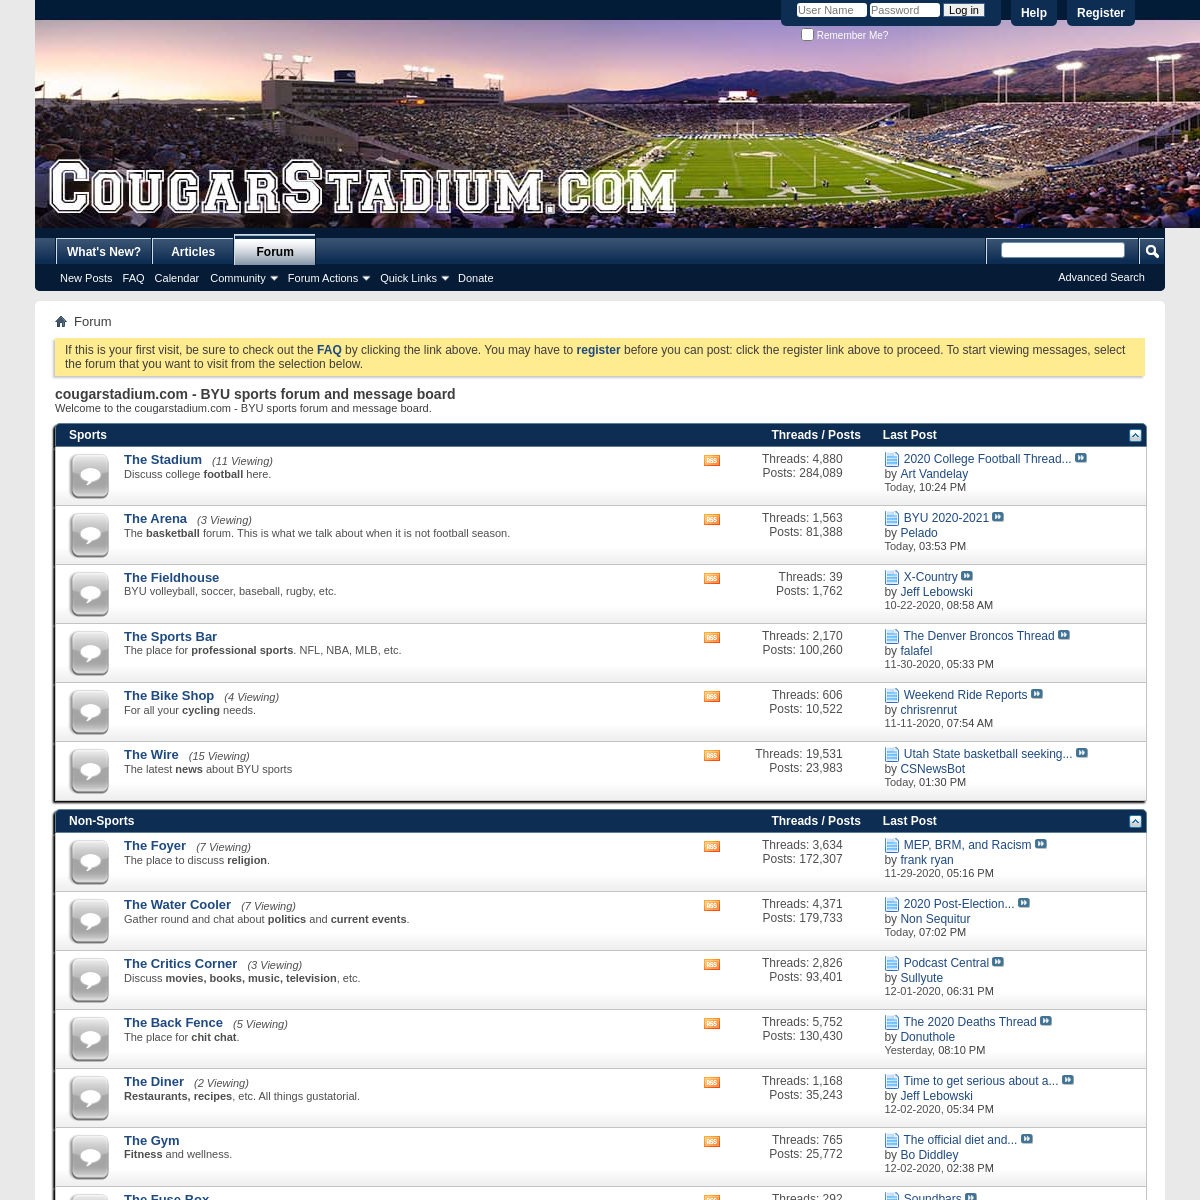 A complete backup of cougarstadium.com